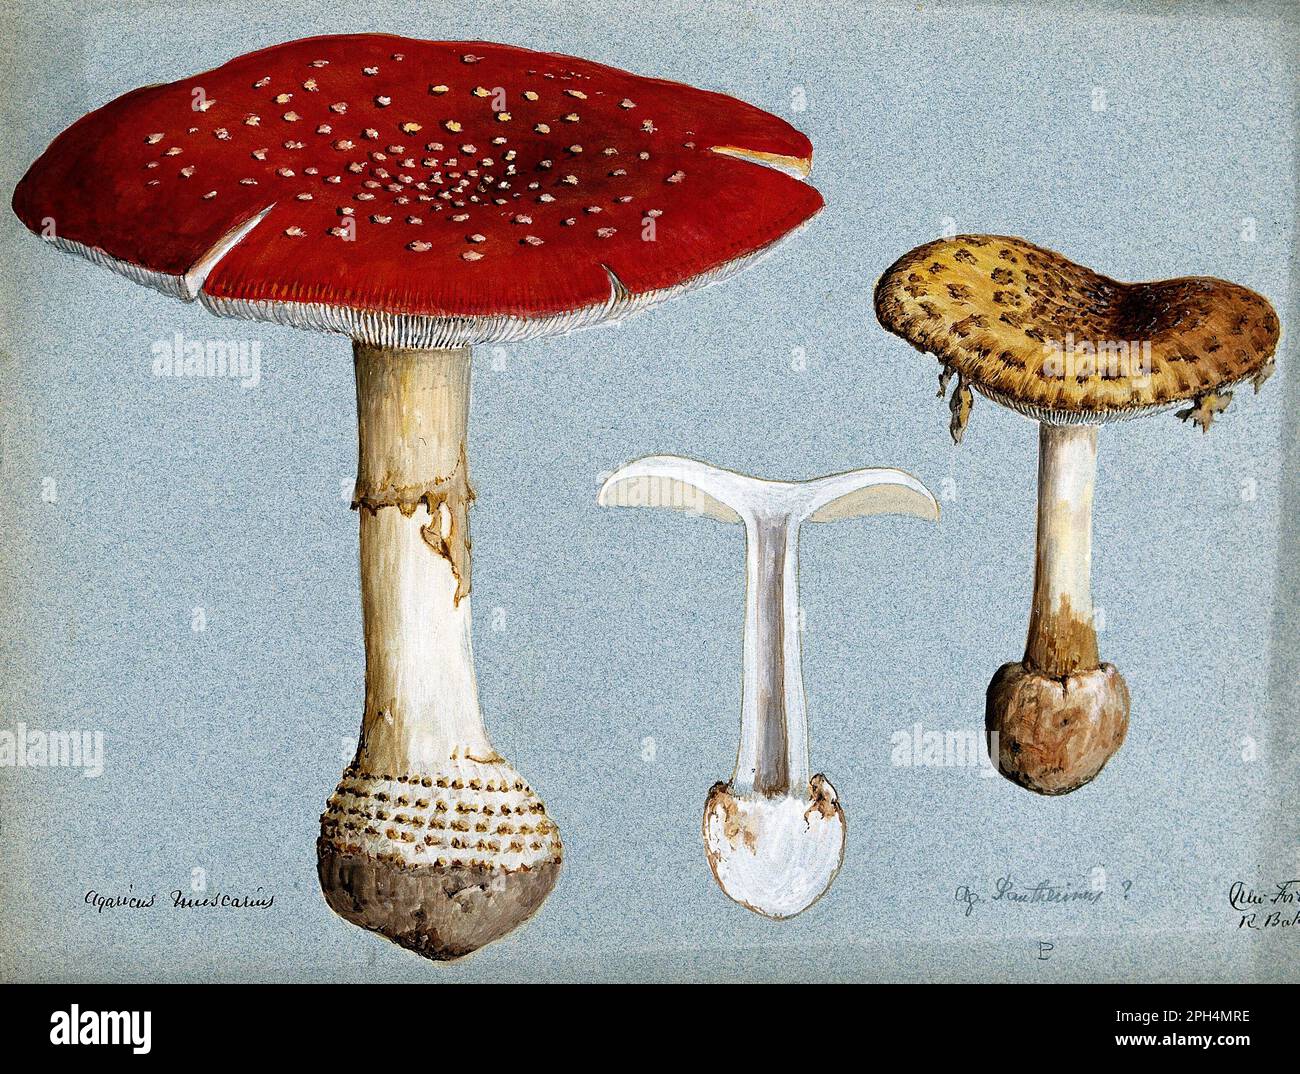 Amanita muscaria, commonly known as the Fly agaric or Fly amanita, vintage watercolour from 1898 Stock Photo